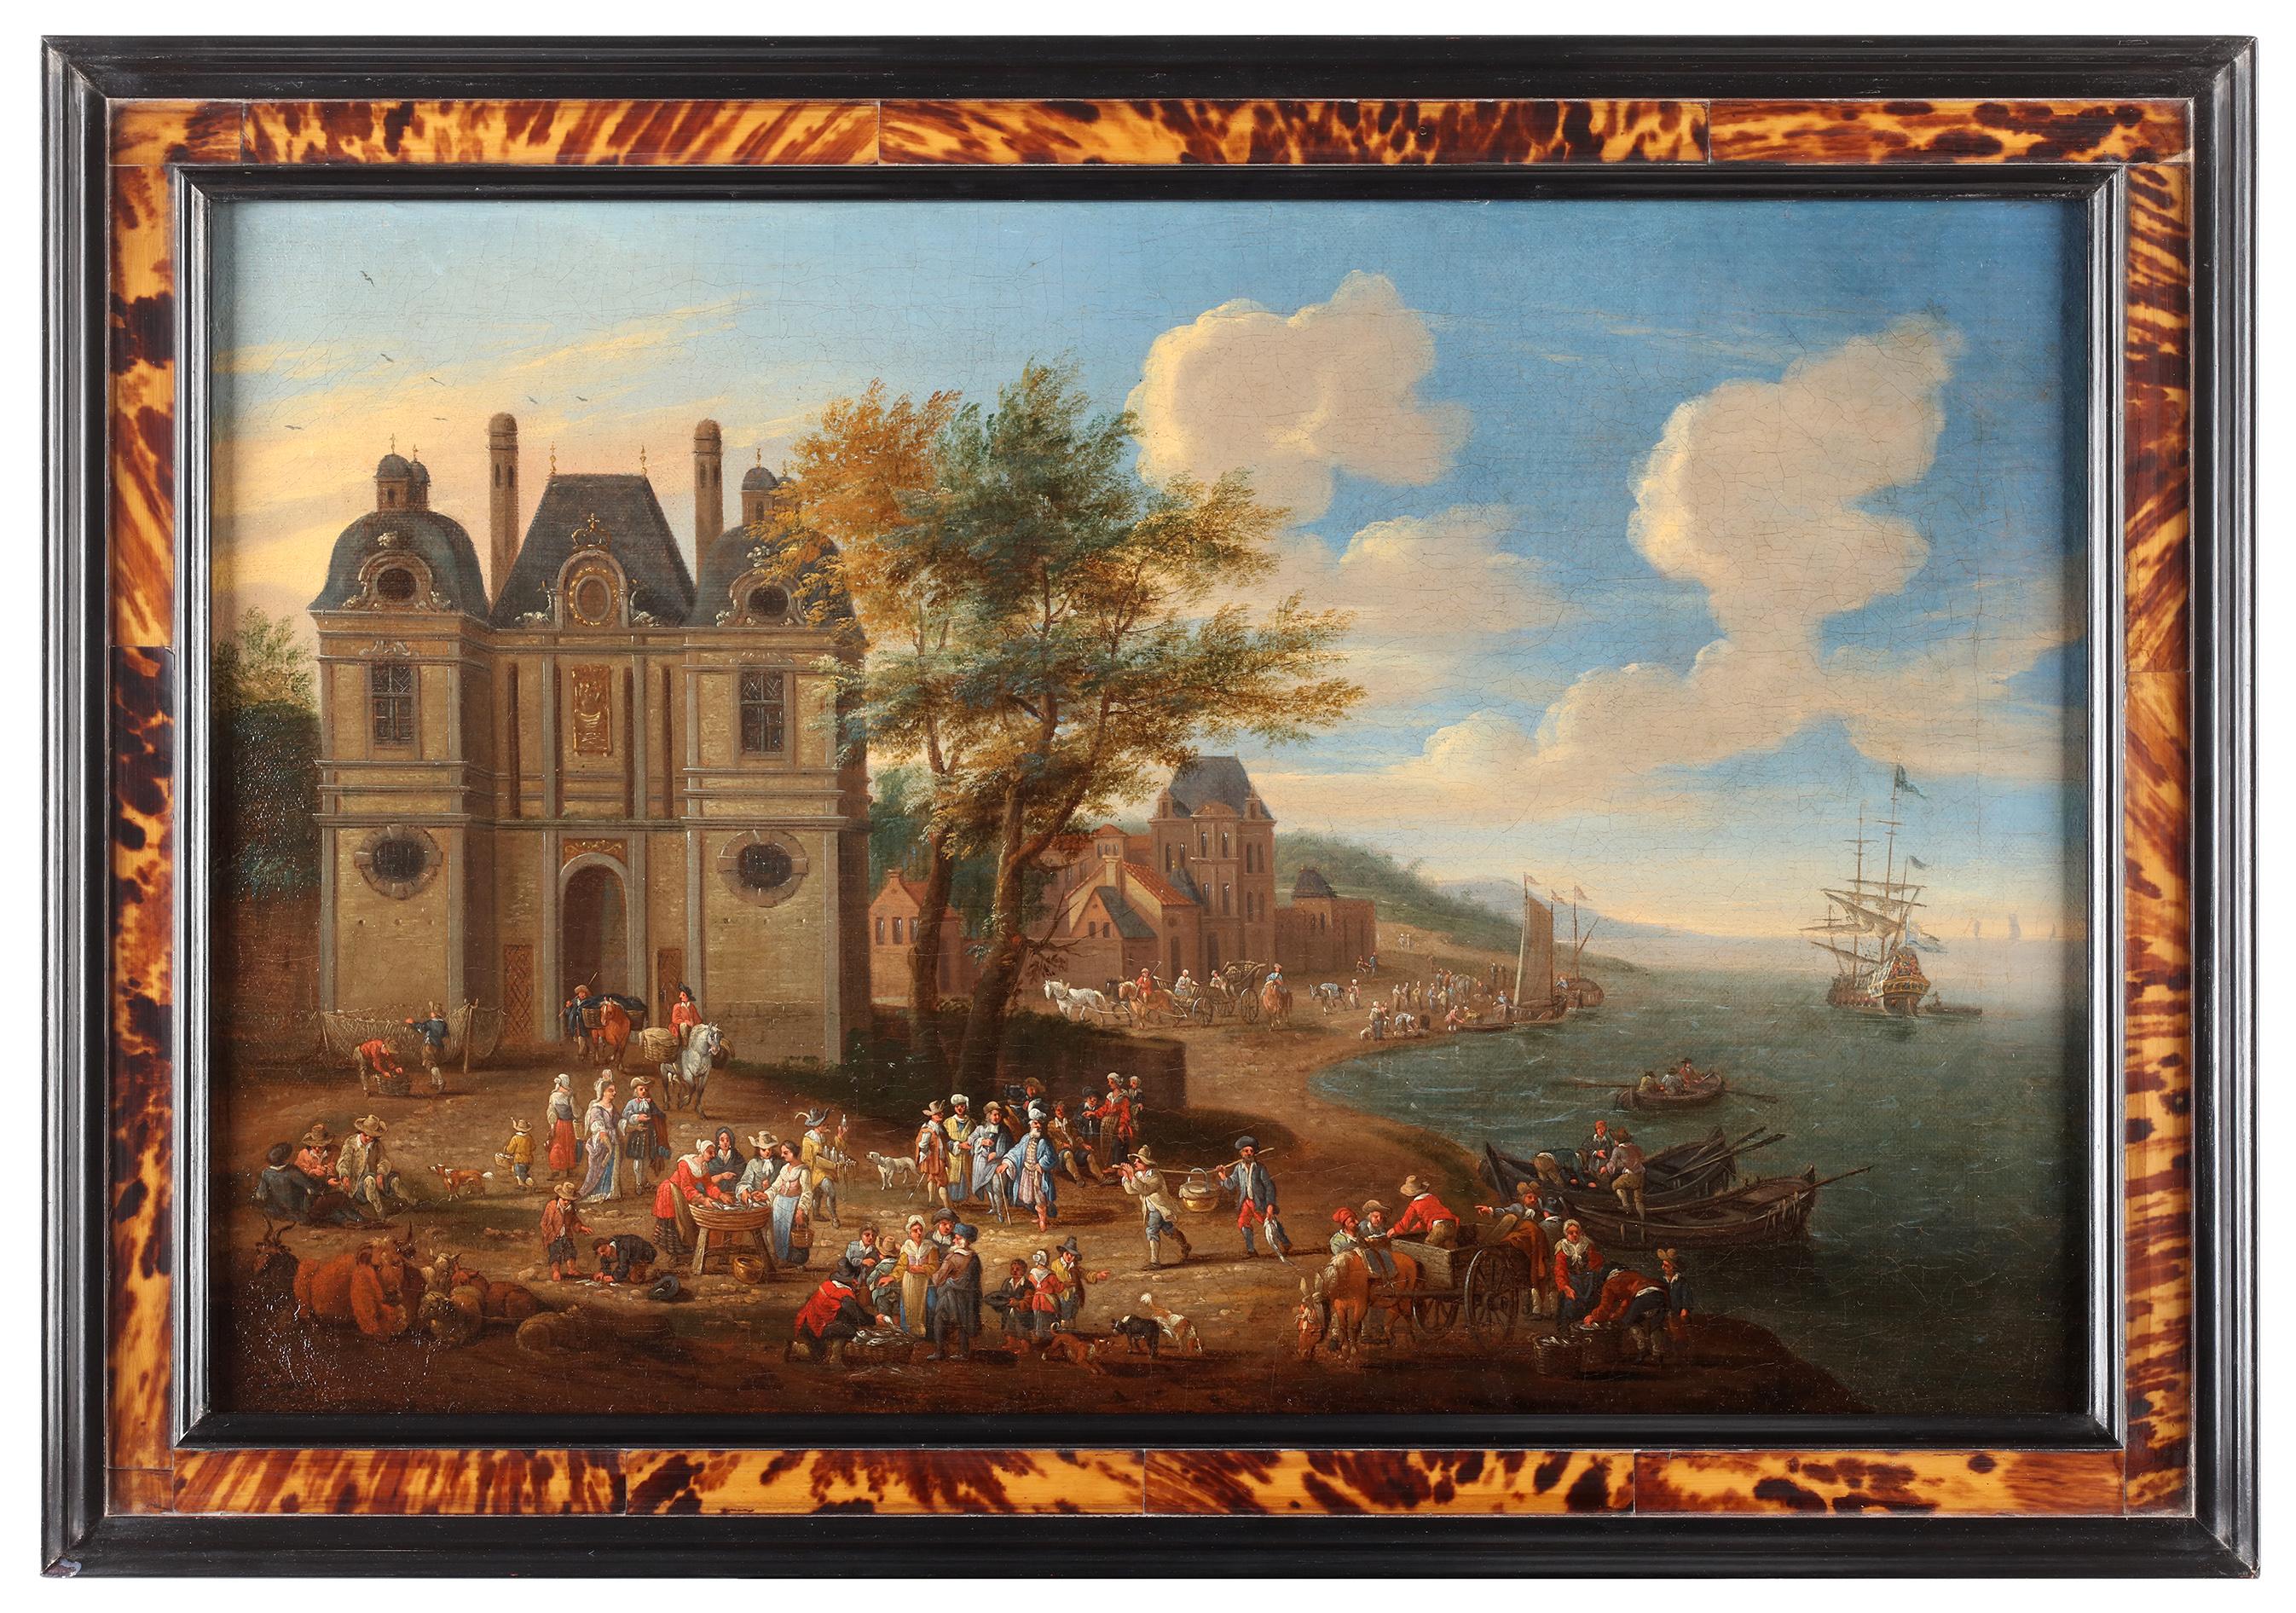 Two scenes showing a fish market in front of a town - Mathijs Schoevaerdts - Painting by Matthijs Schoevaerdts